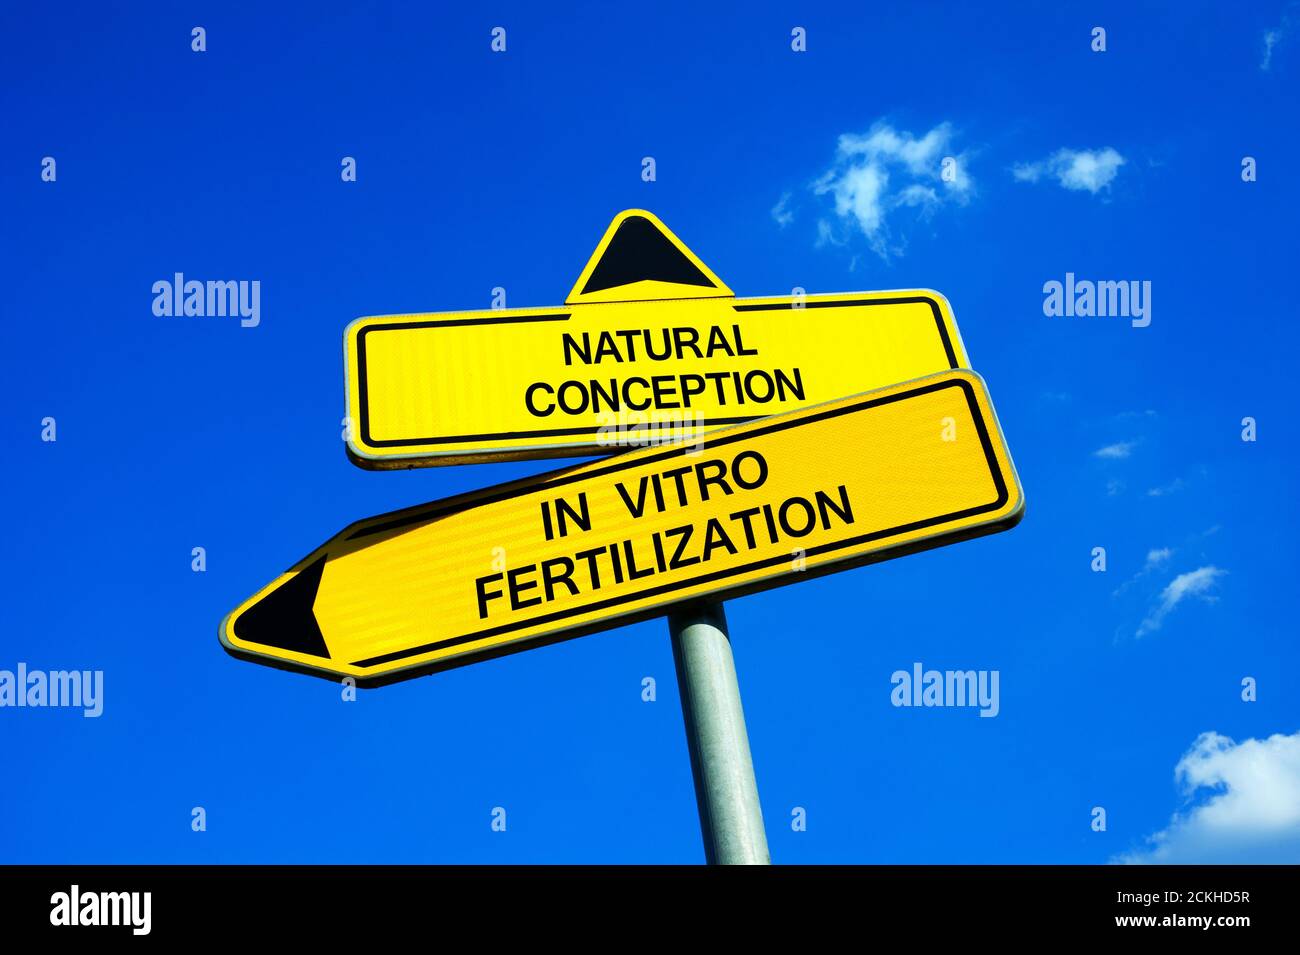 Natural Conception vs In Vitro Fertilization - Traffic sign with two options - Assisted reproductive technology for treatment of infertility. Medical Stock Photo